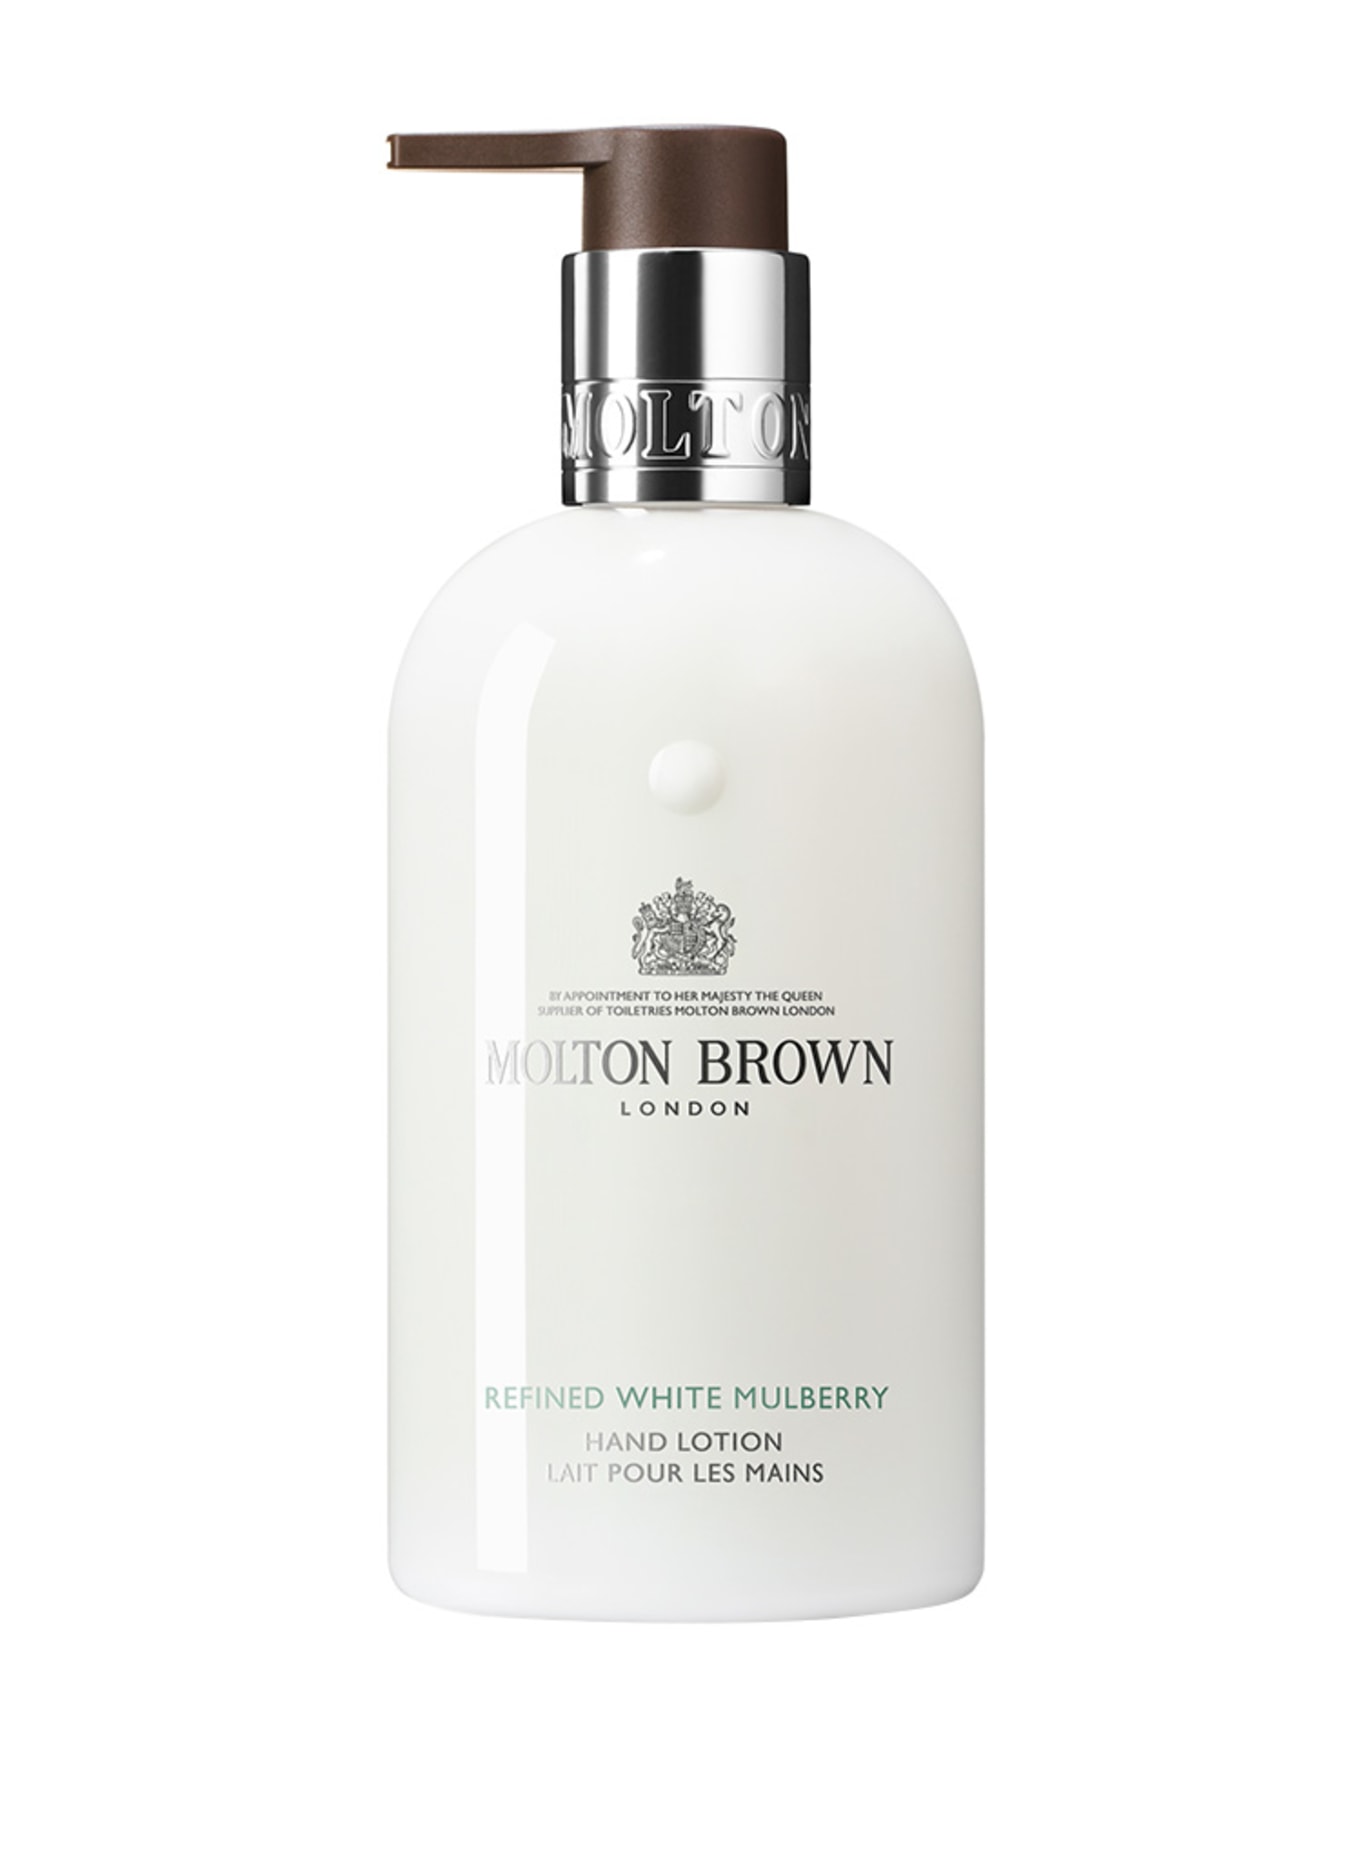 MOLTON BROWN REFINED WHITE MULBERRY (Obrázek 1)